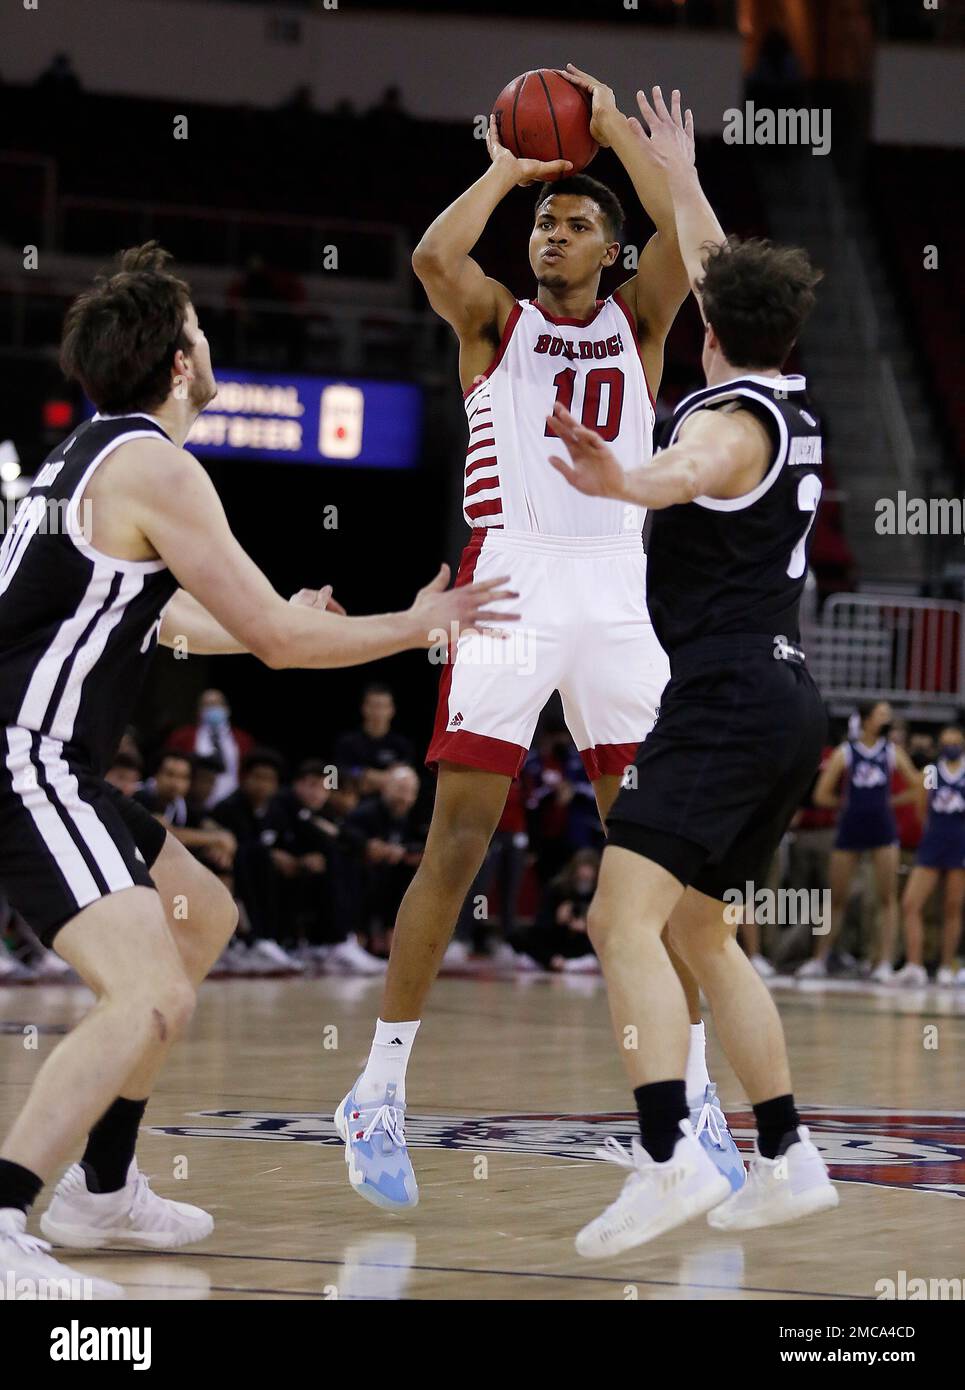 Fresno State's Orlando Robinson shoots against Nevada defenders, including  Alem Huseinovic, right, during the second half of an NCAA college basketball  game in Fresno, Calif., Friday, Feb. 4, 2022. (AP Photo/Gary Kazanjian